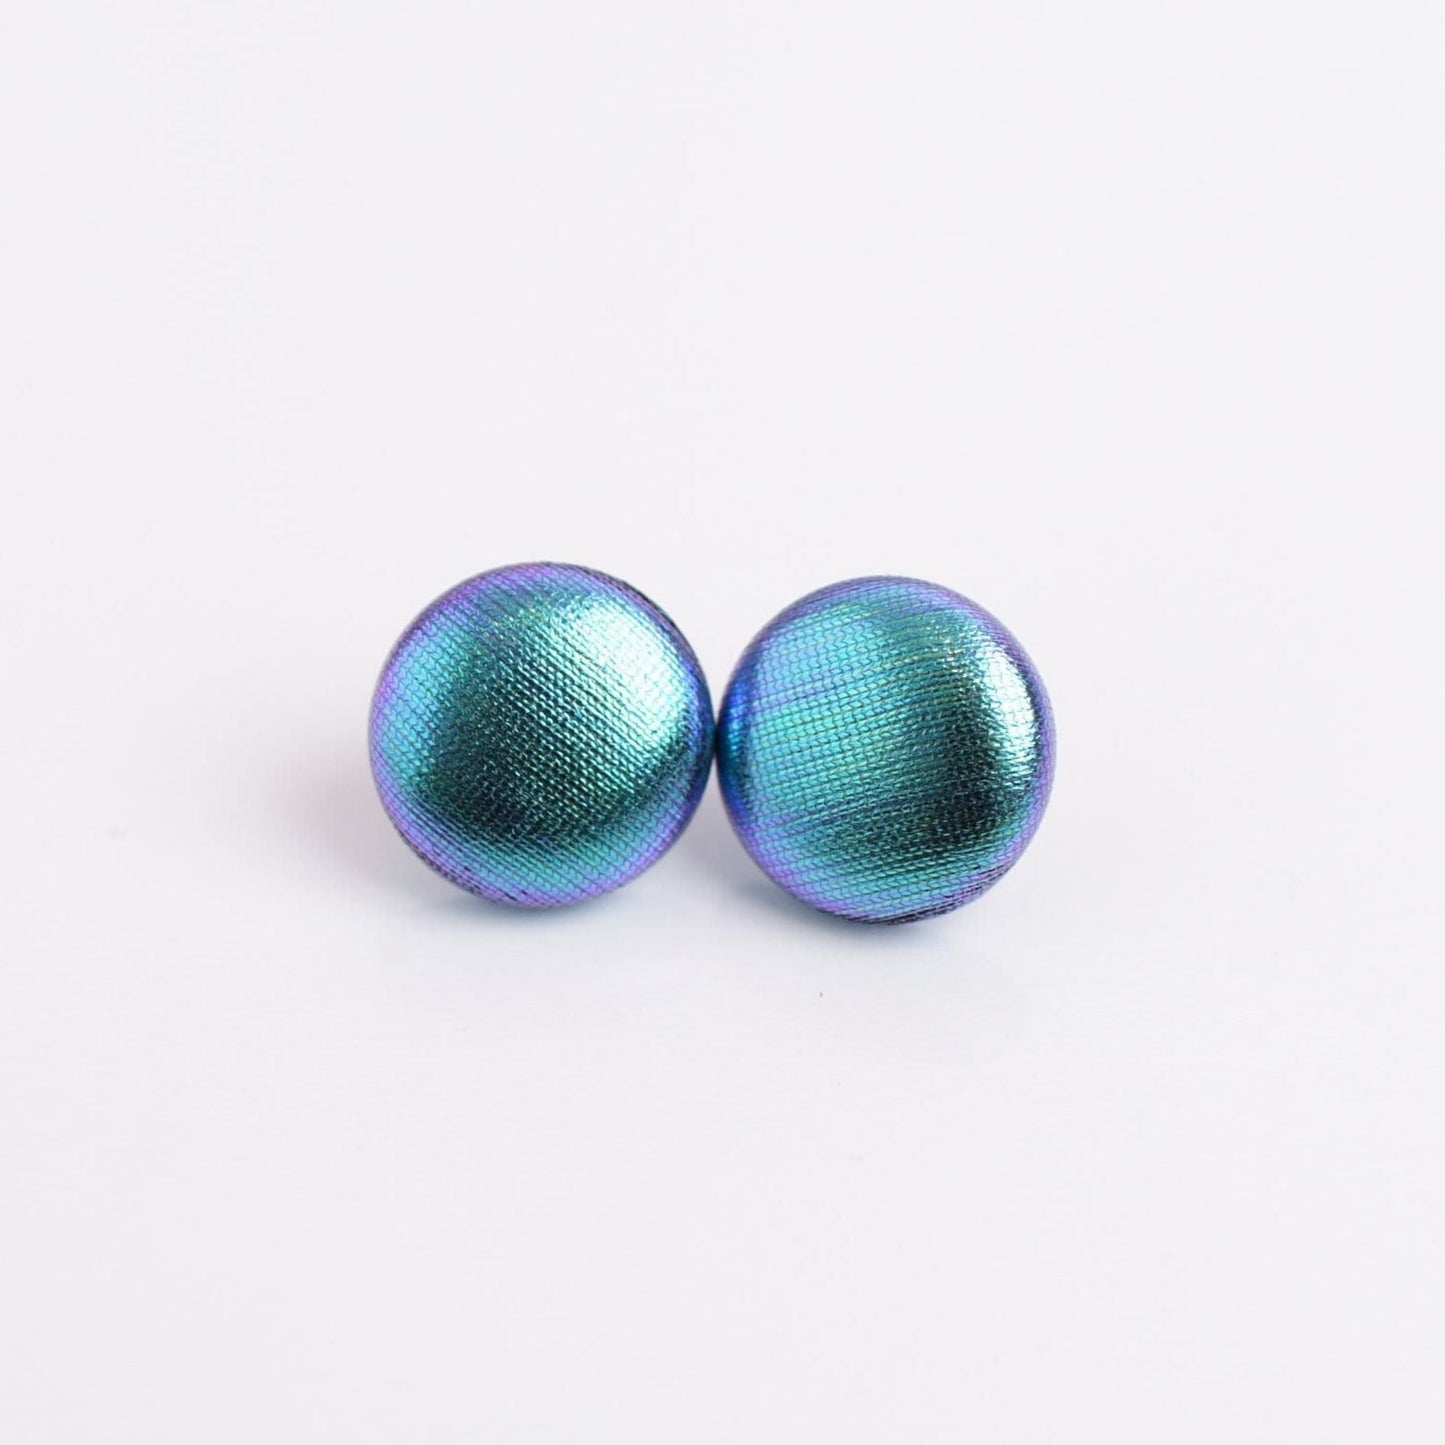 Holographic Fabric Button Earrings with Titanium Posts or Clip Ons